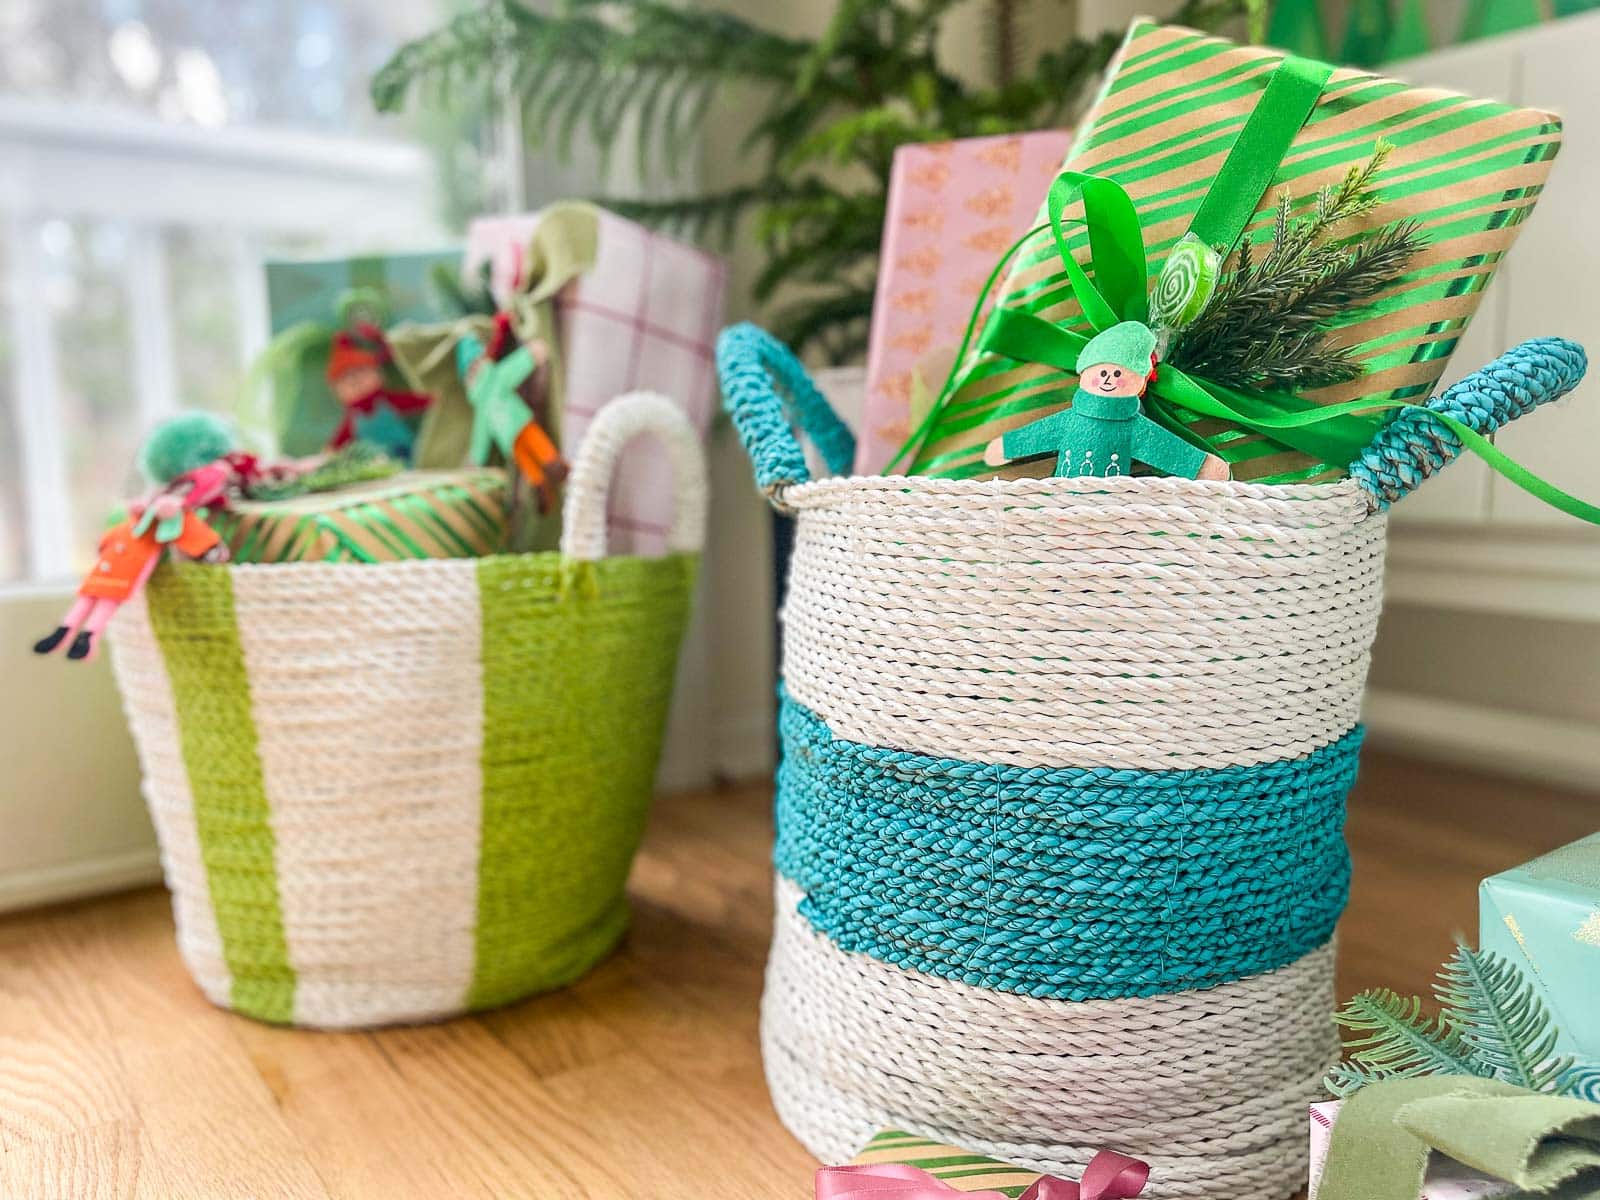 How to Paint Colorful Baskets